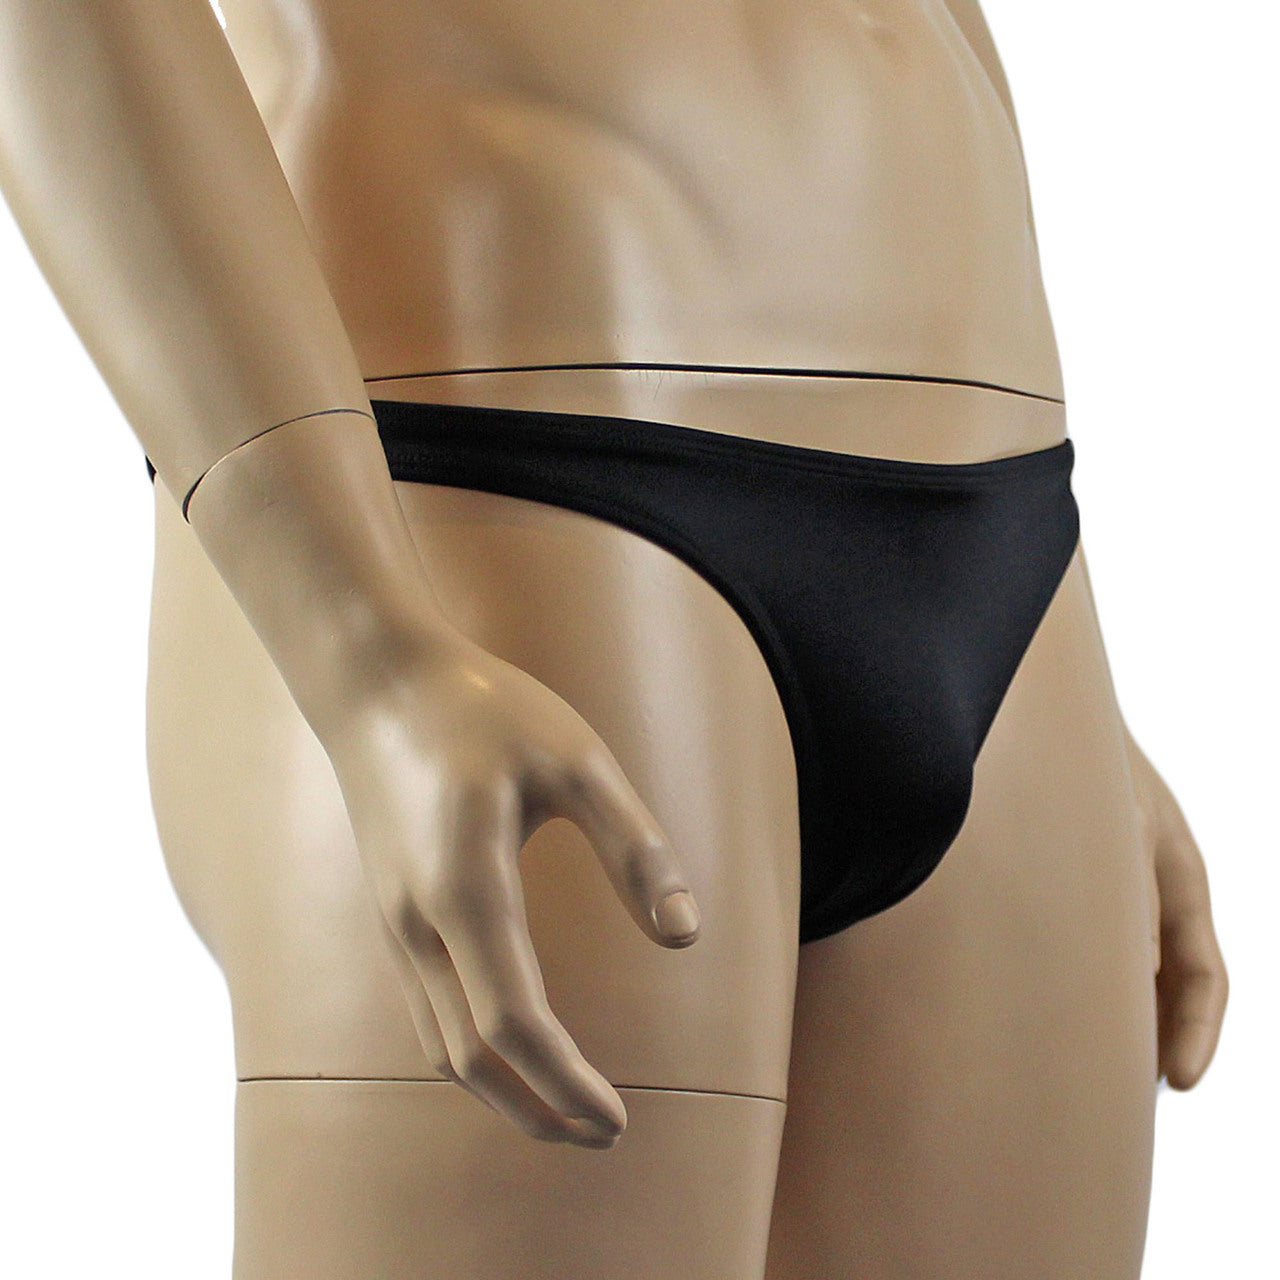 Mens Gaff Thong Tuck In and Hide the Package (black plus other colours)